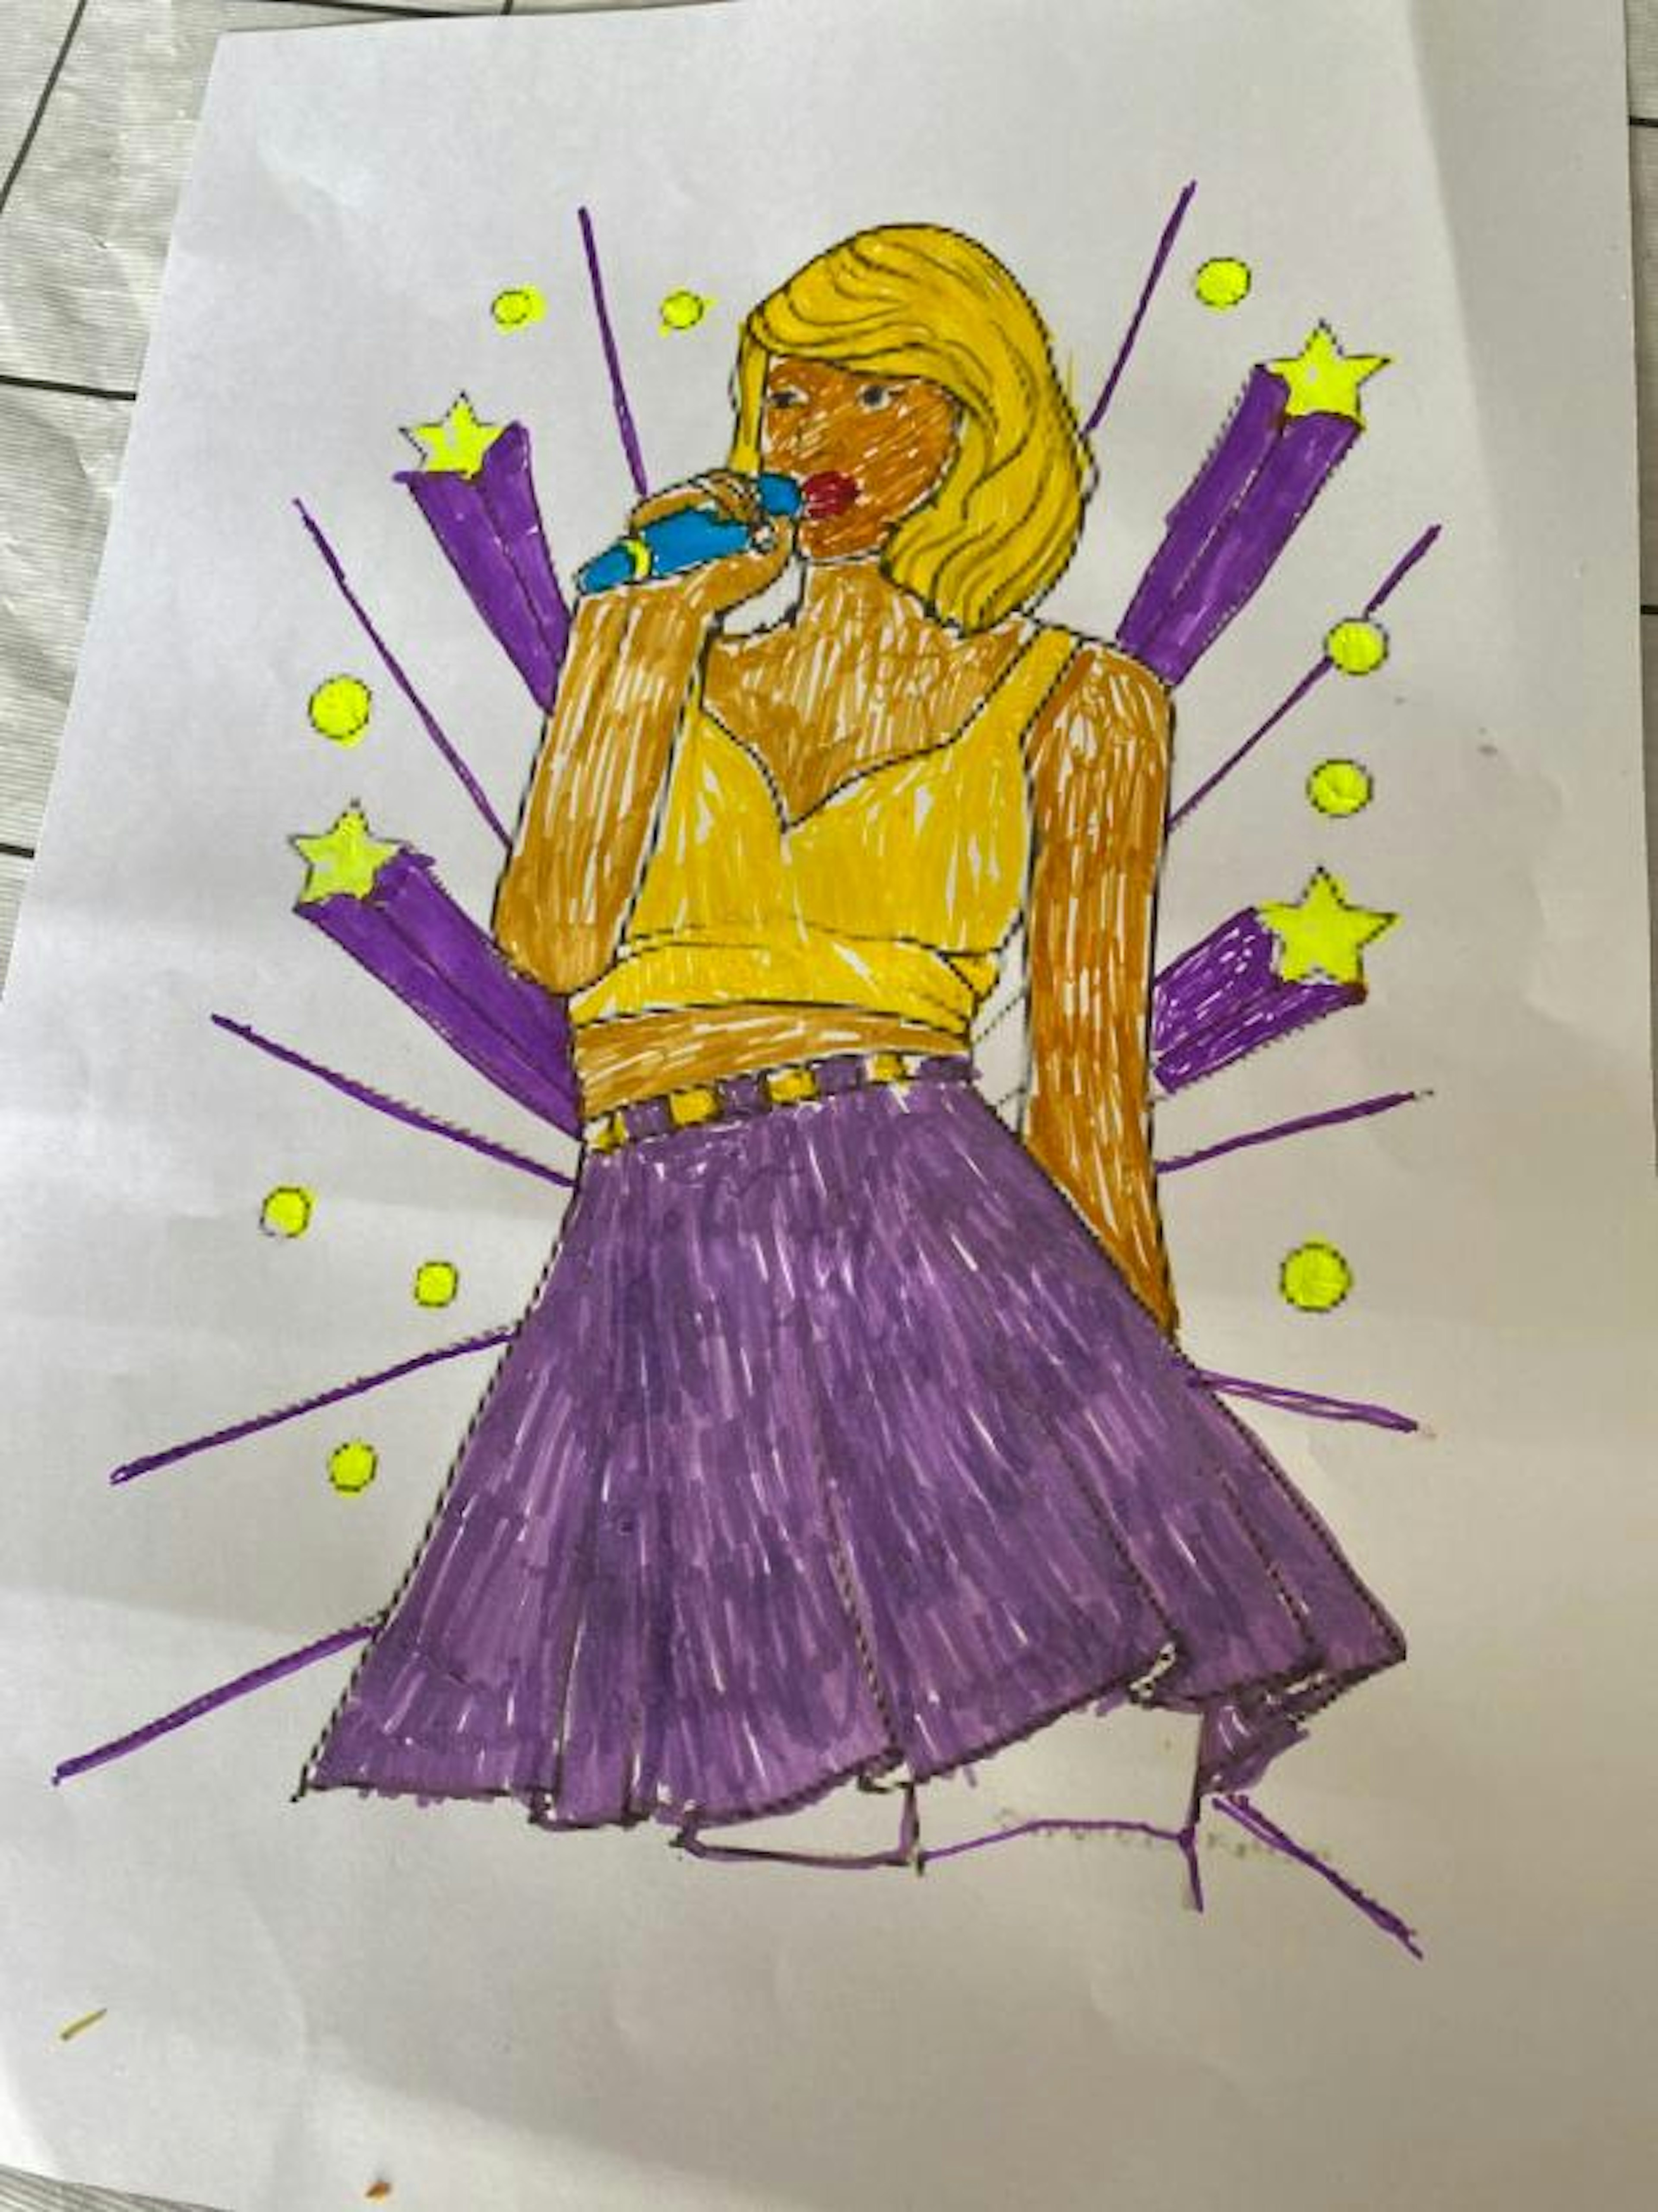 A Taylor Swift image for the captains who were singing Taylor songs on the Laughternoon show